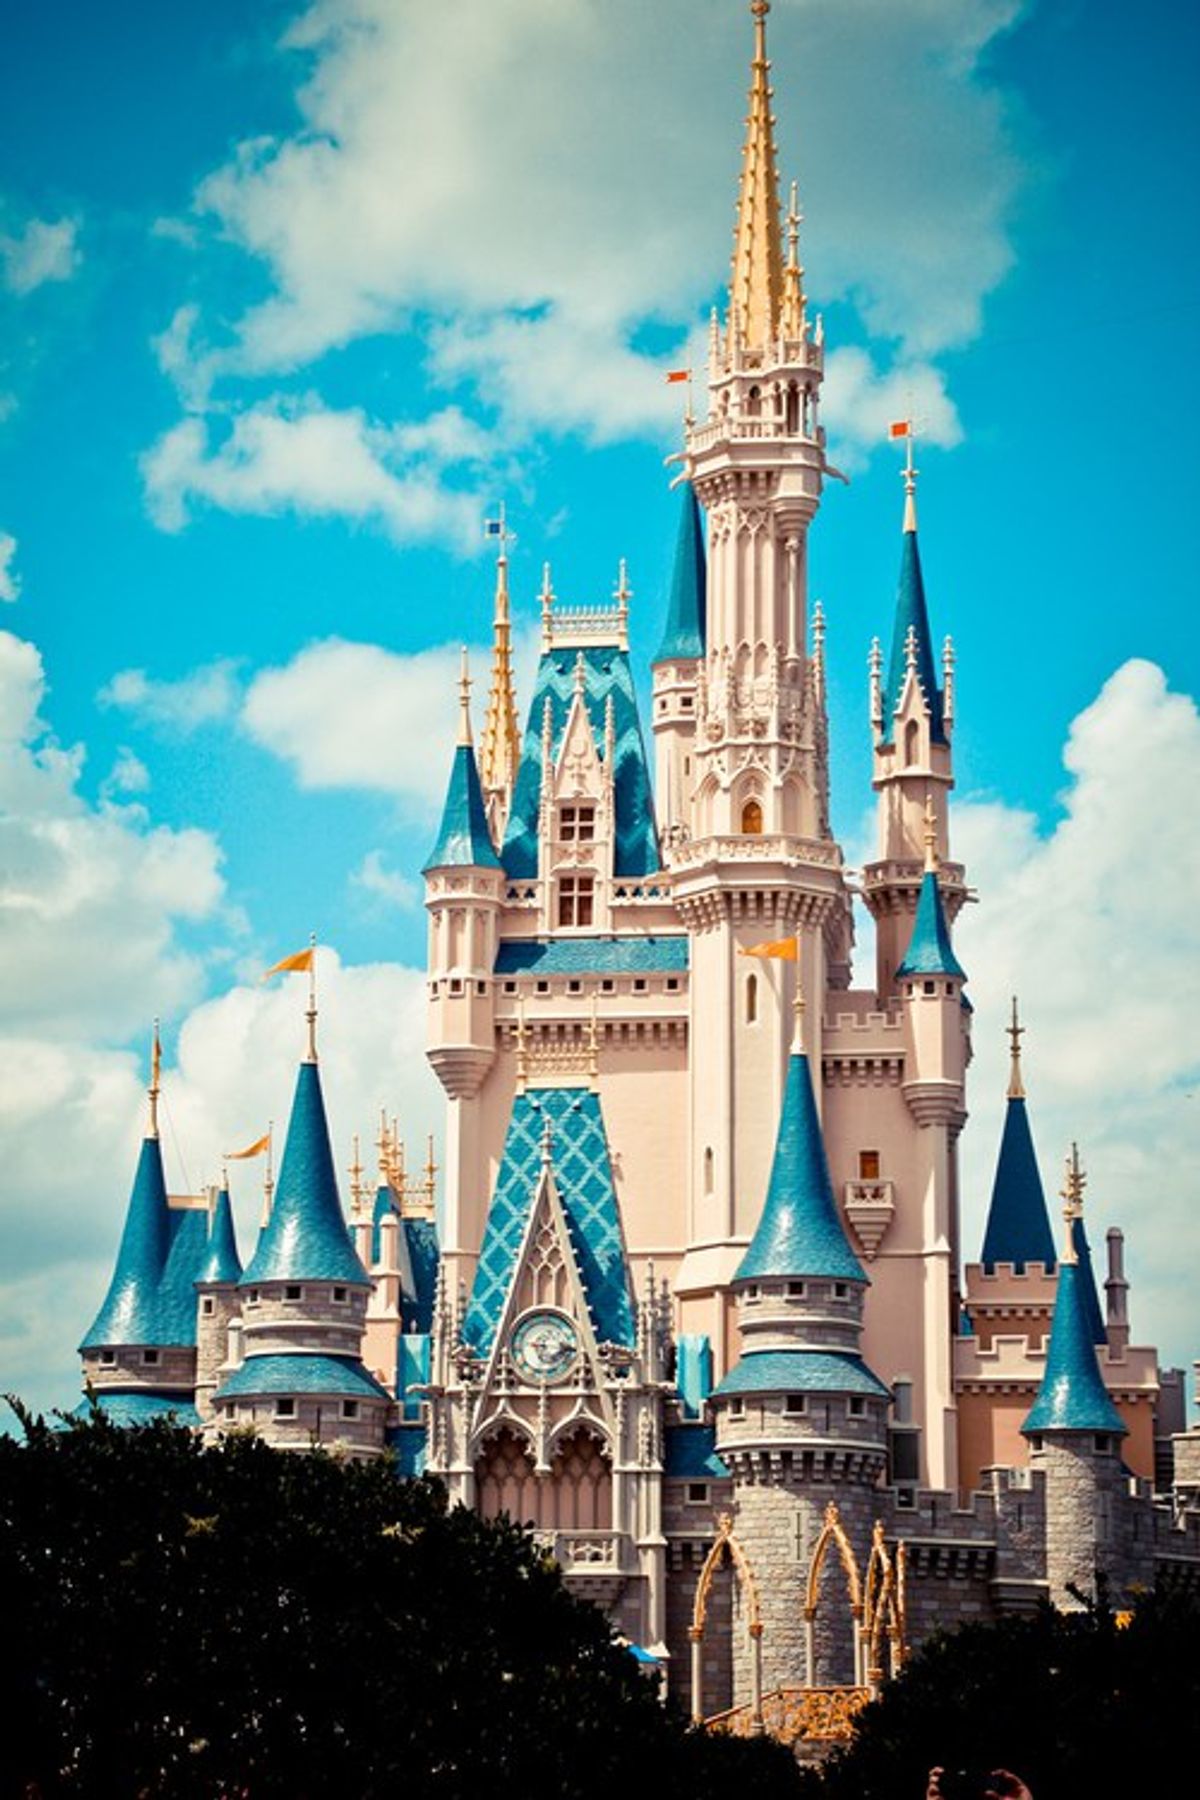 Why I'm Excited To Go To Disney World For My Senior Trip